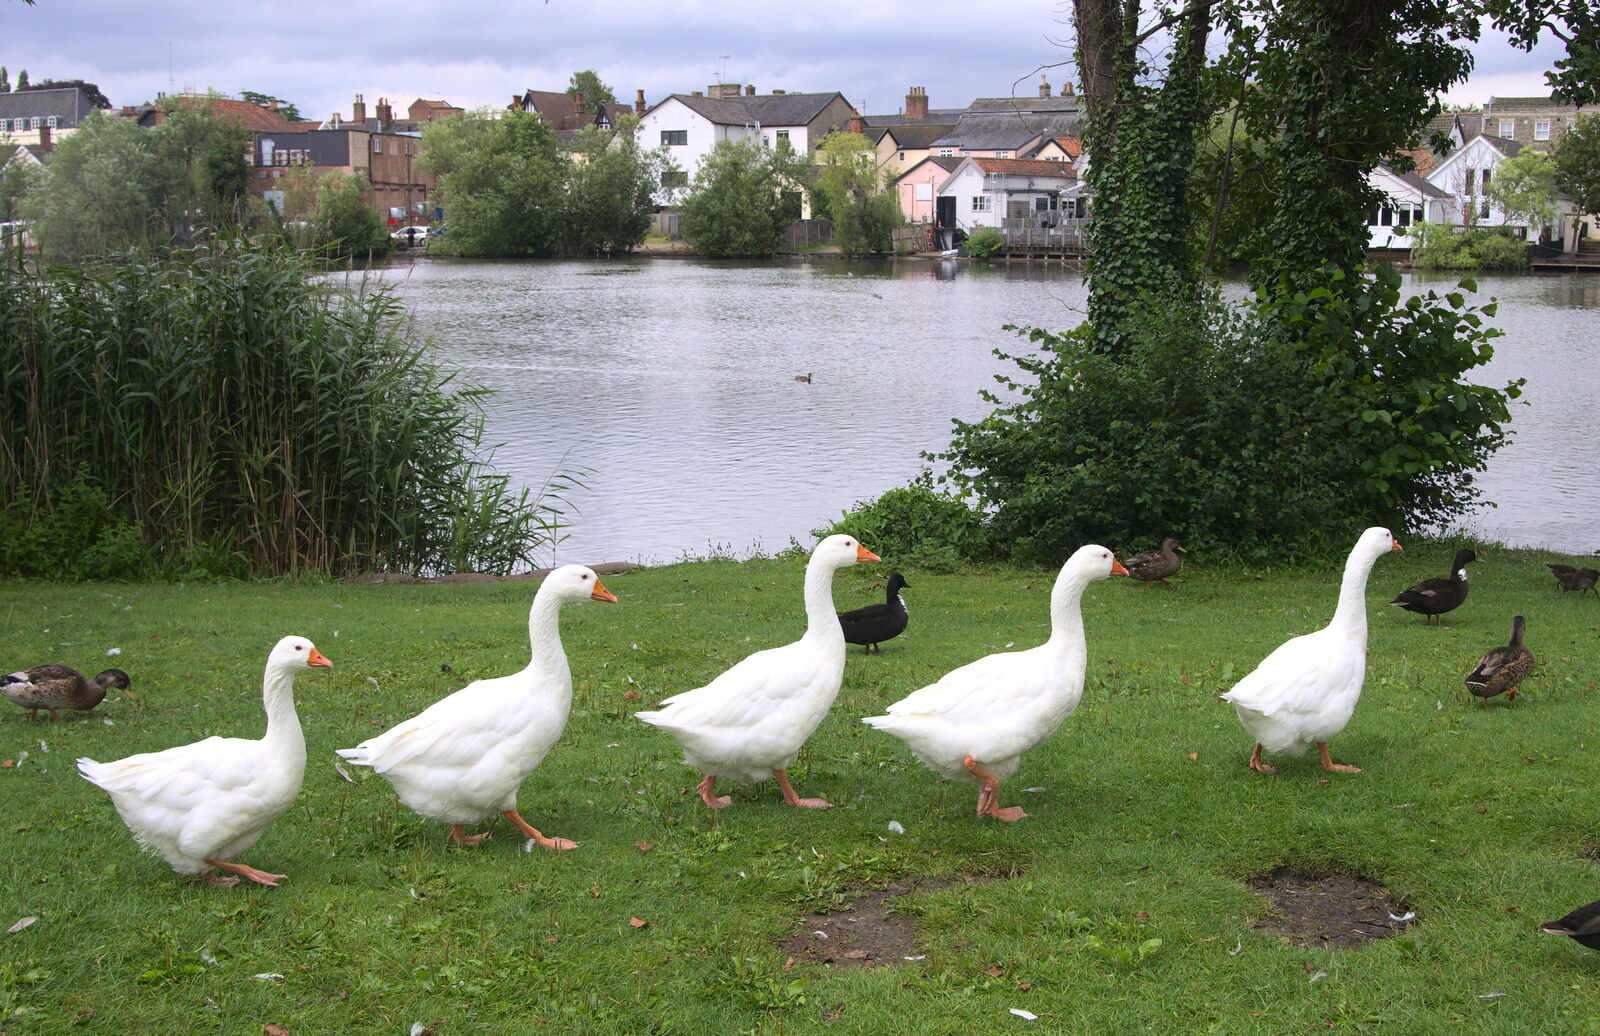 The geese go marching off in a line from Diss Fest, or Singin' in the Rain, Diss, Norfolk - 23rd July 2017